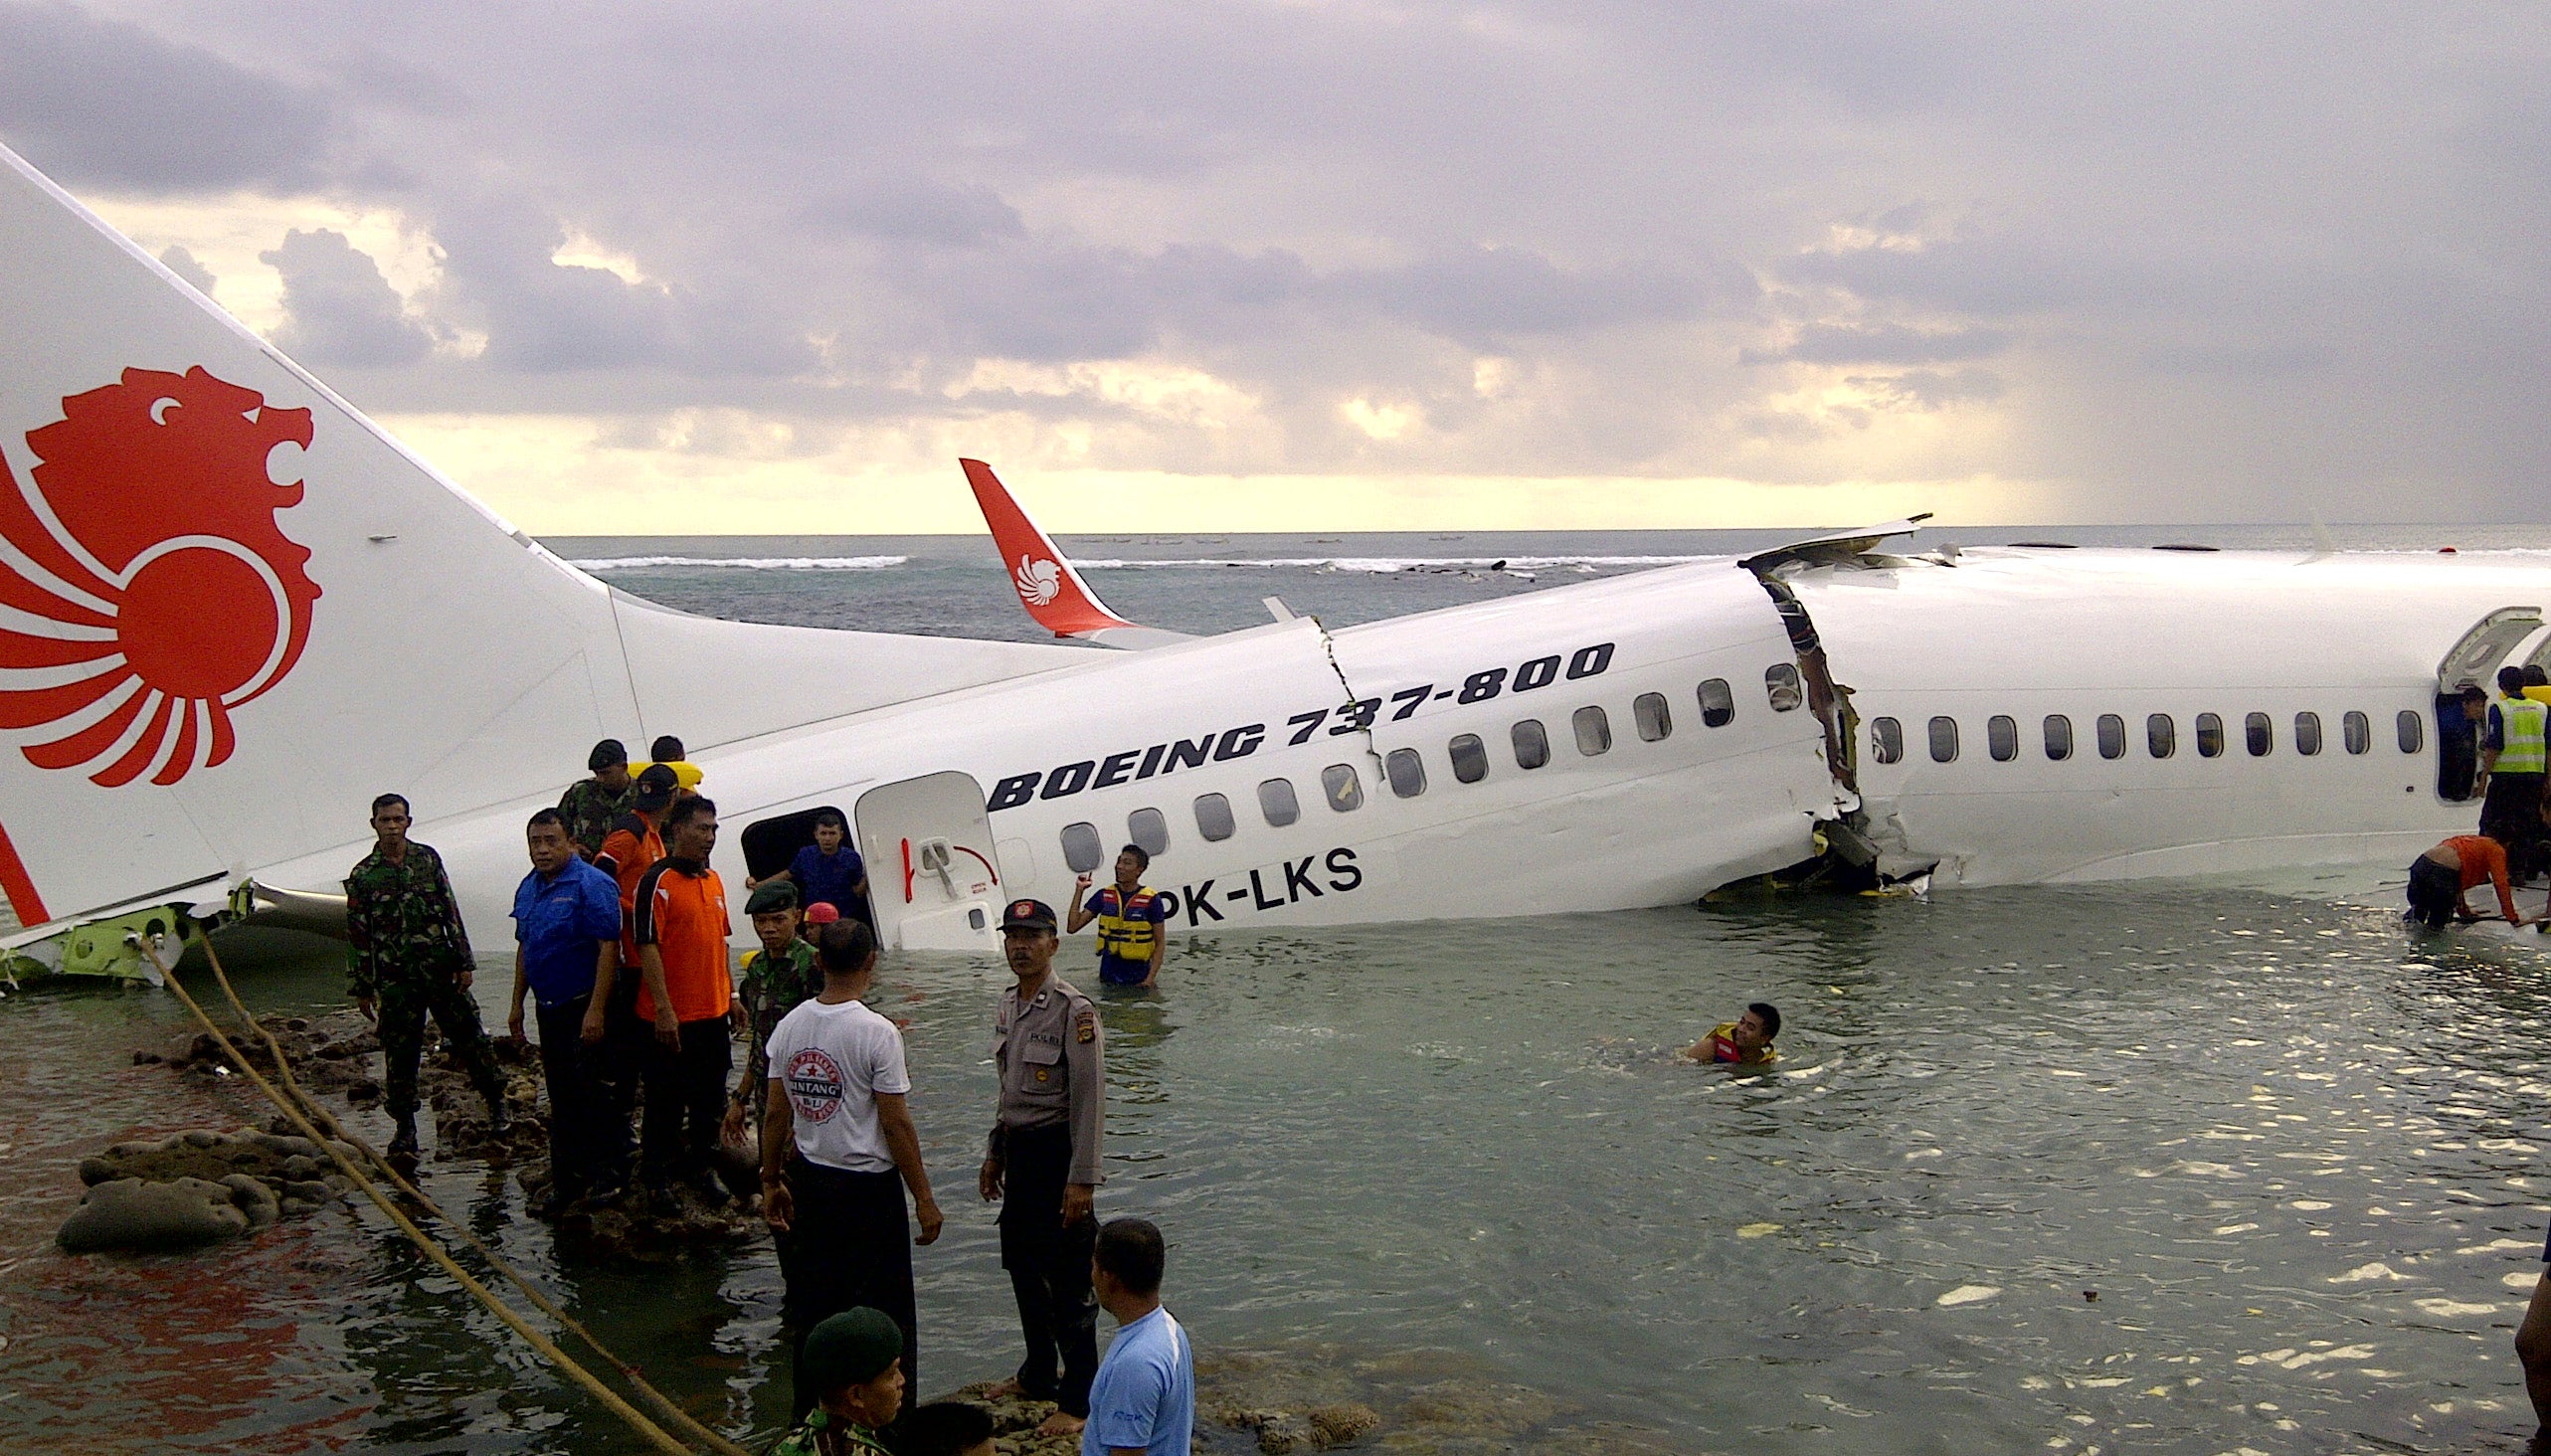 Plane Crashes in Bali and Breaks in Half, Everyone Survives